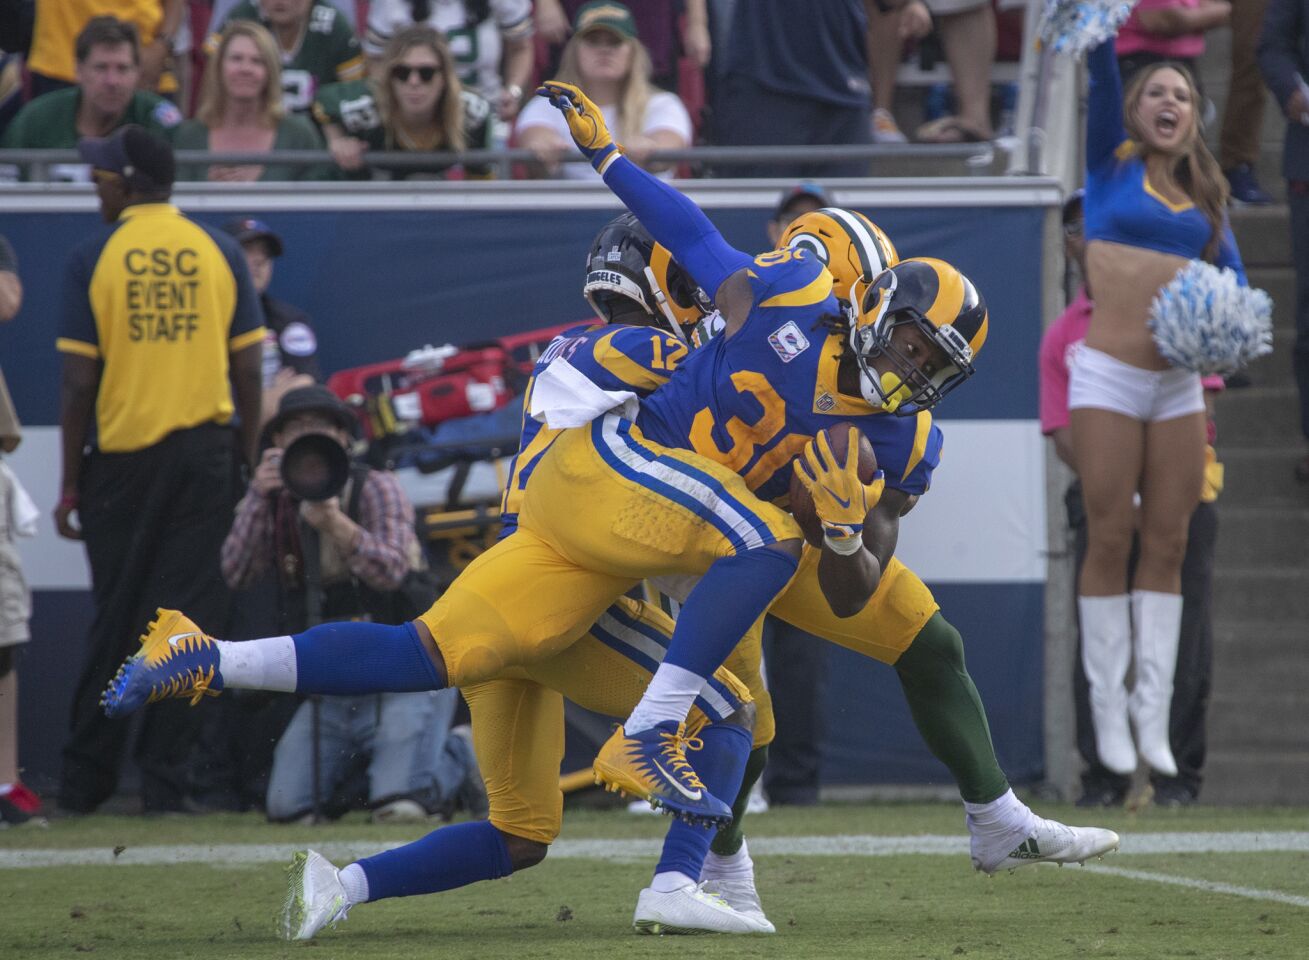 Rams' Todd Gurley II (30) is tangled up with Green Bay Packers' Jaire Alexander at the end of a 23-yard first down run late in the 4th quarter on Sunday.